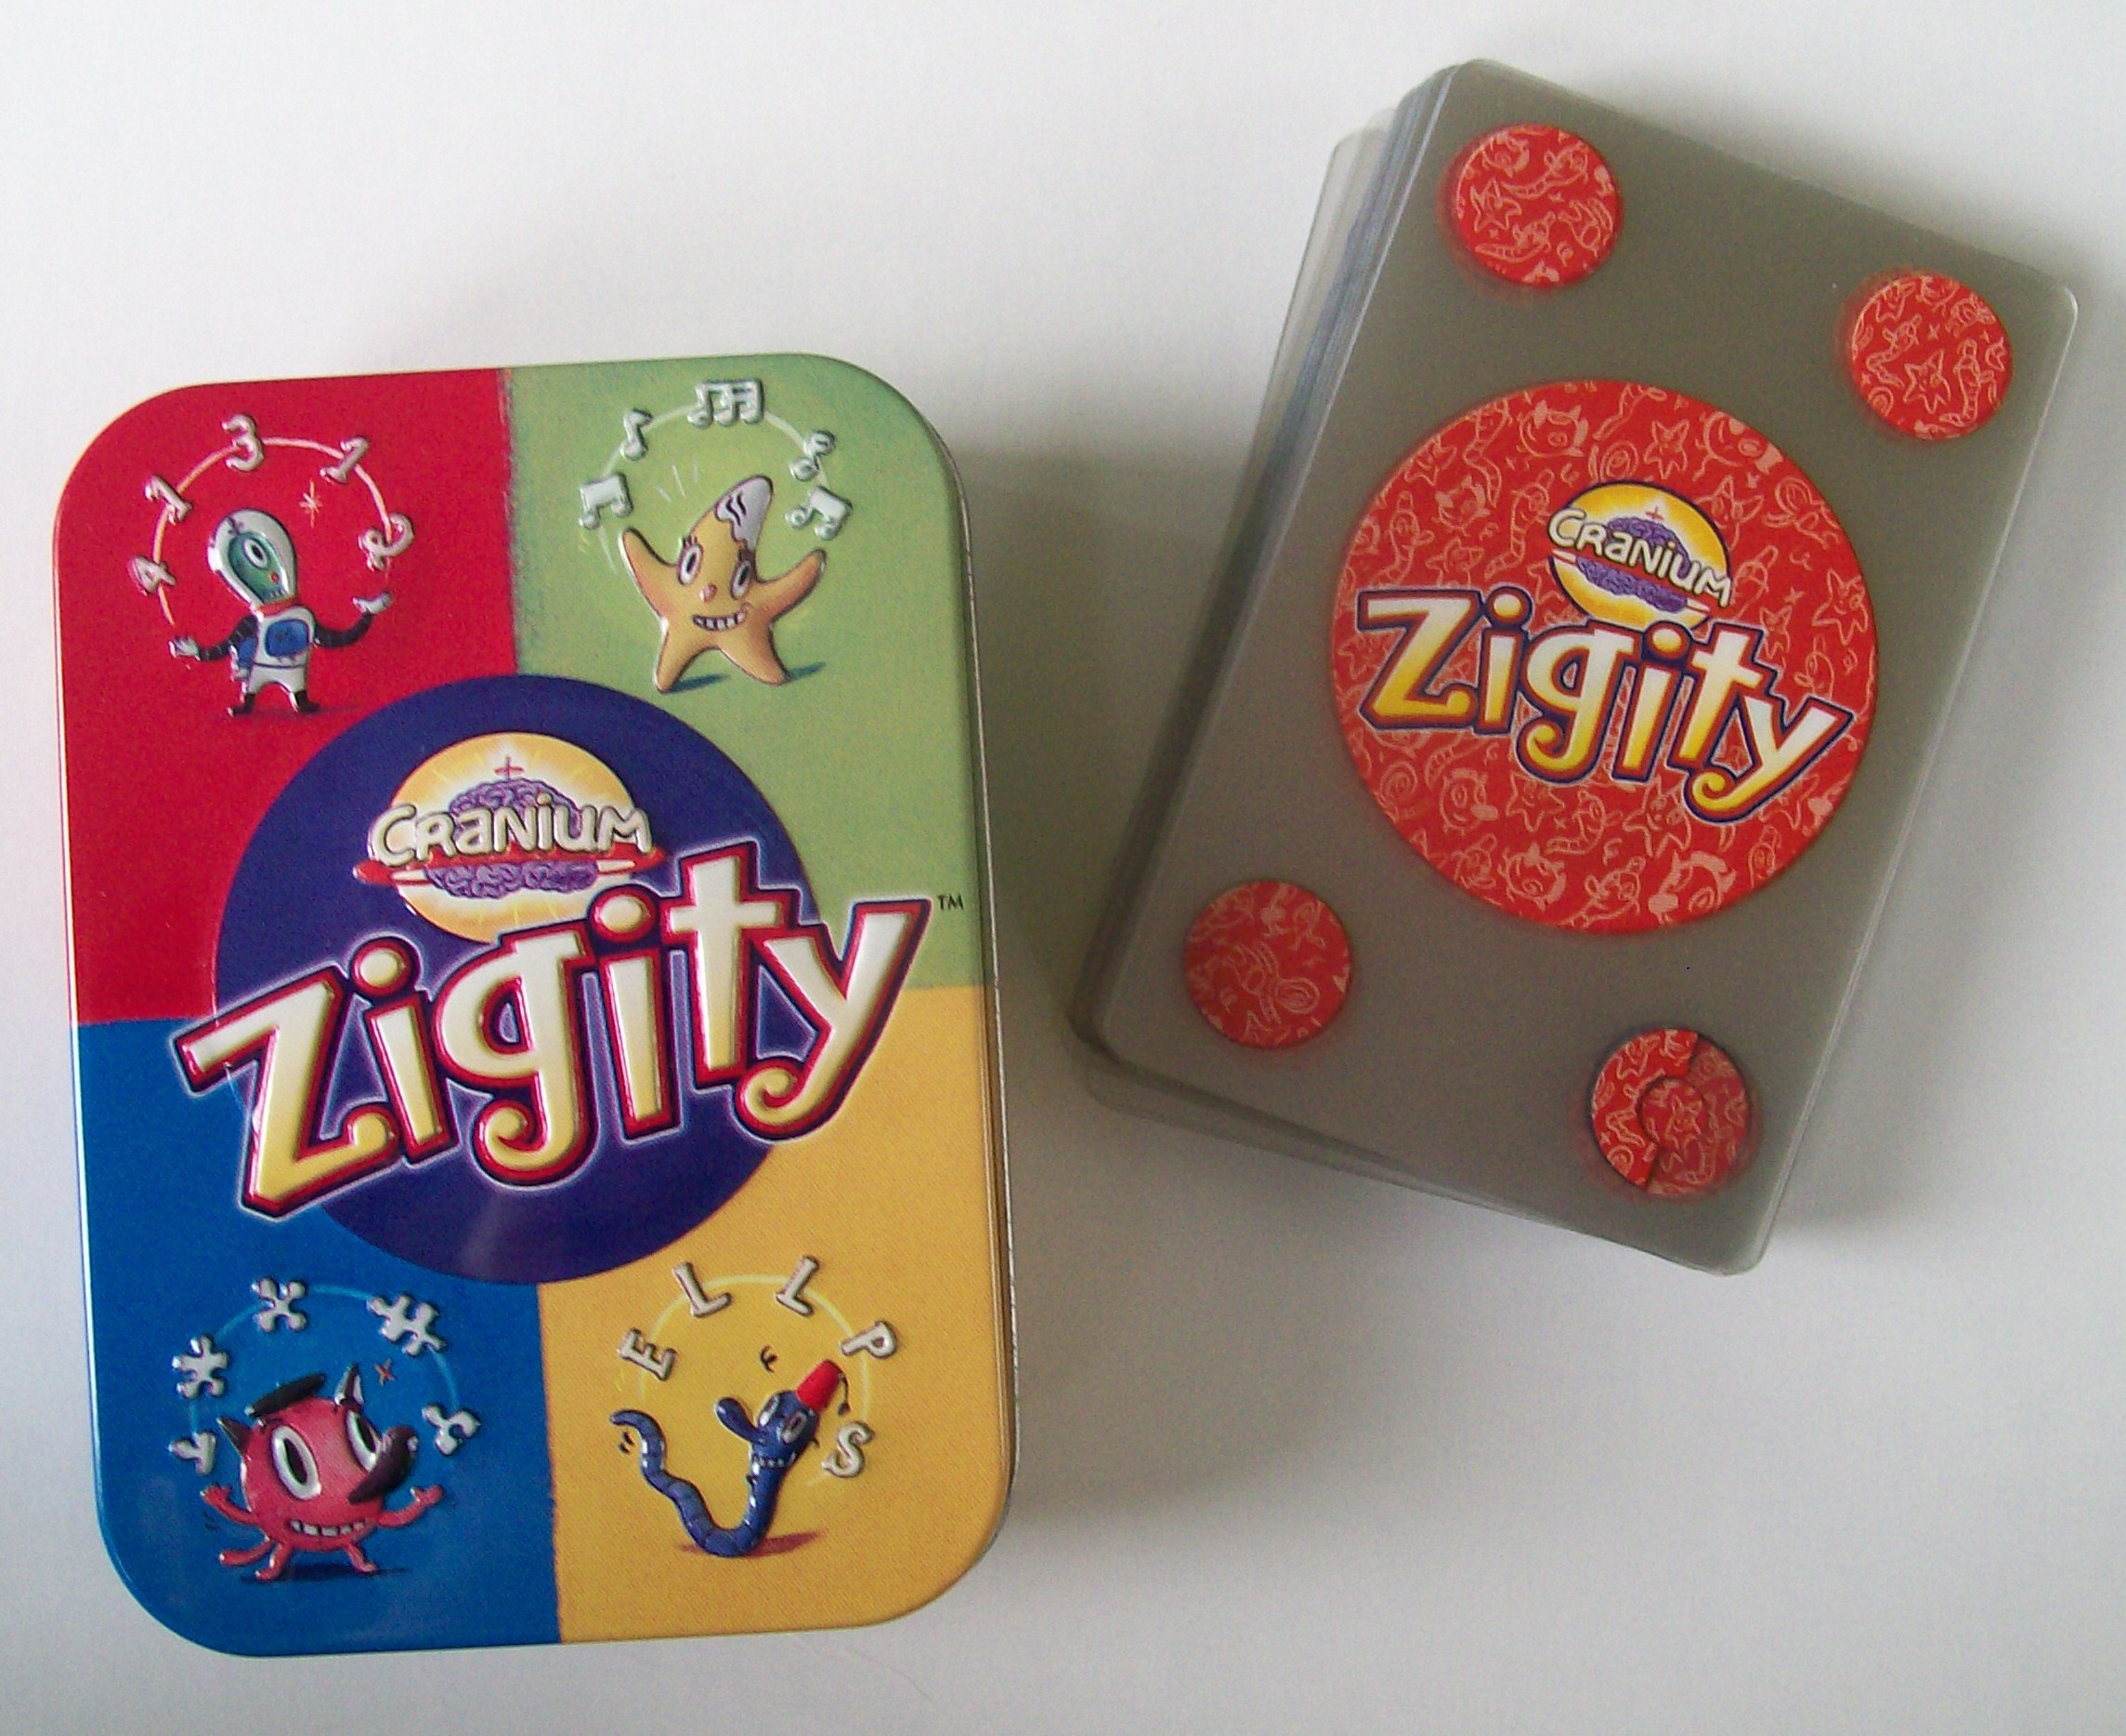 New Card Game of Zigity by Cranium